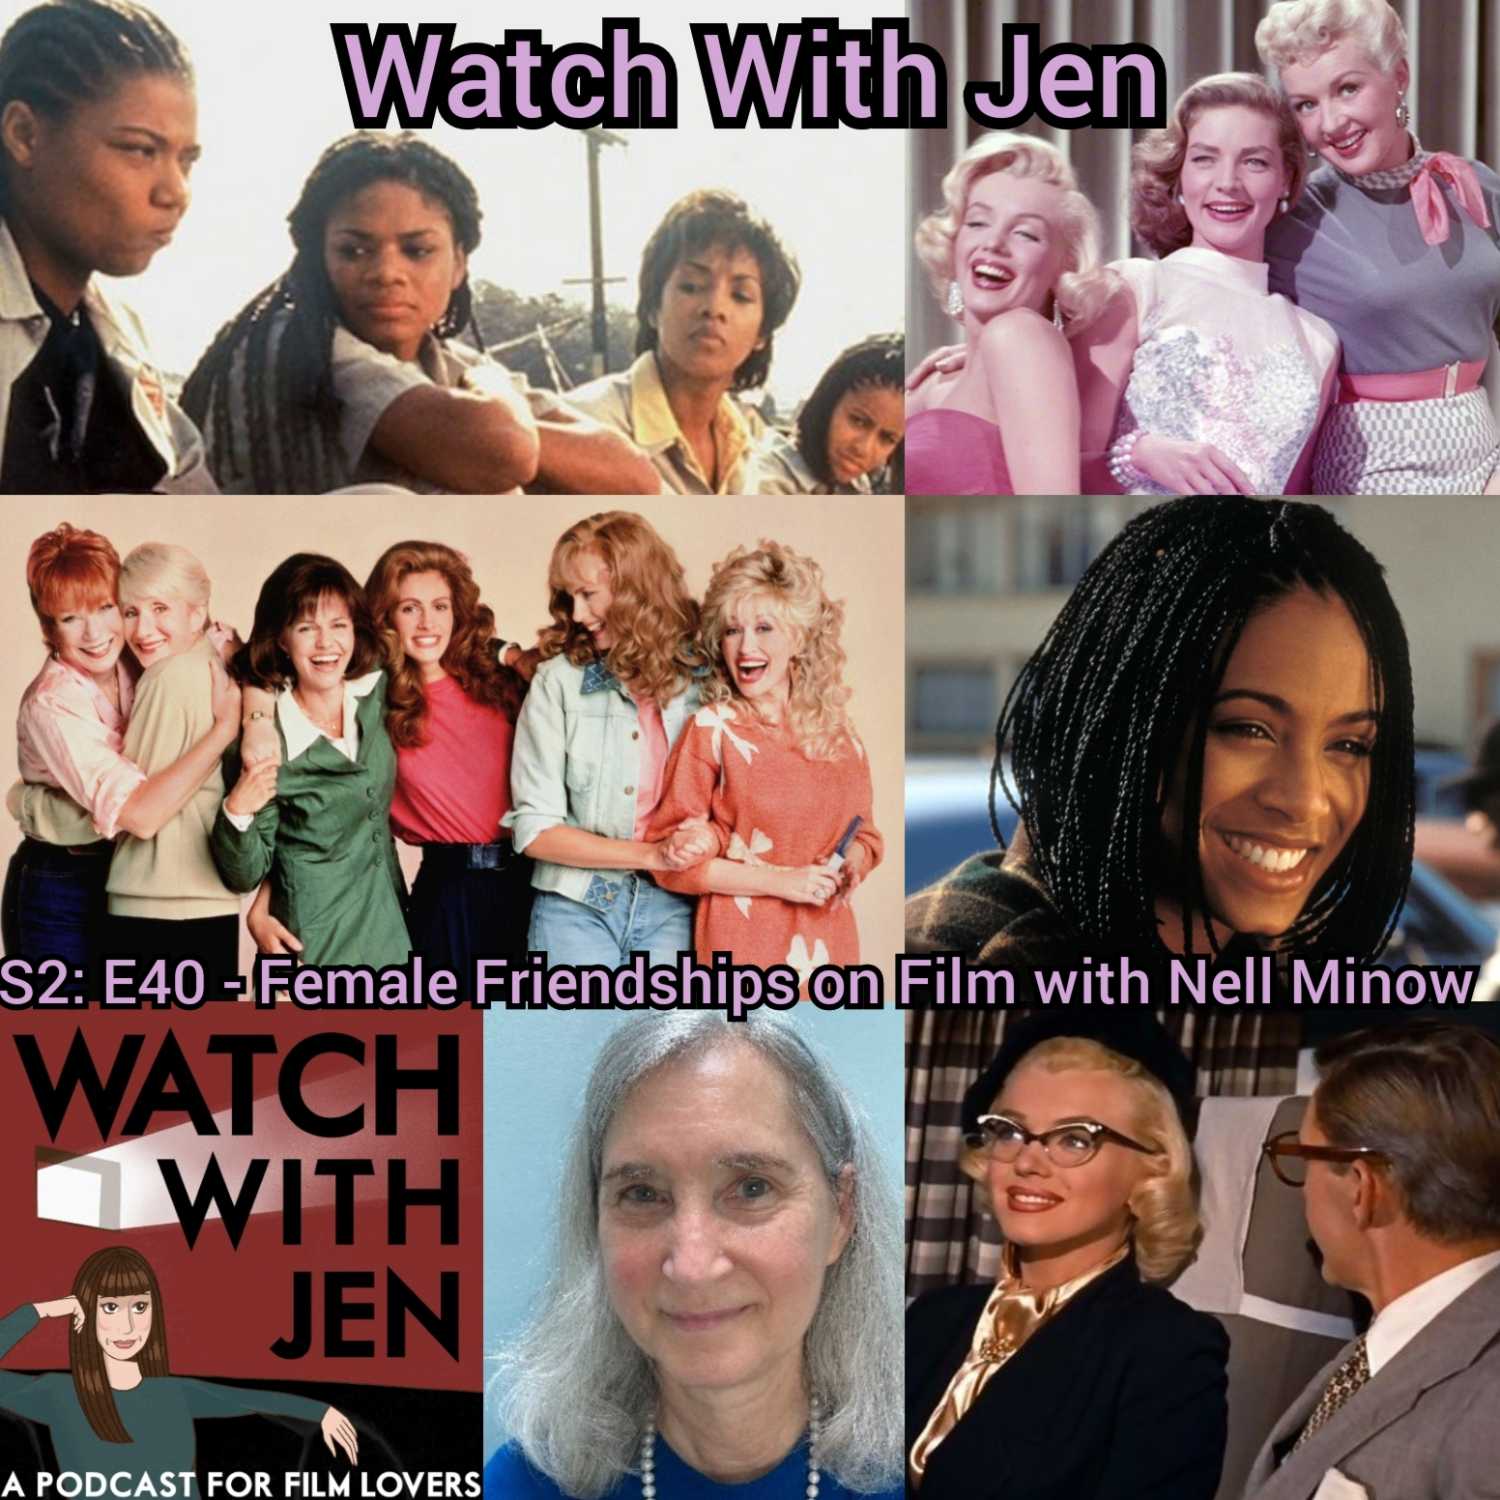 Watch With Jen - S2: E40 - Female Friendships on Film with Nell Minow